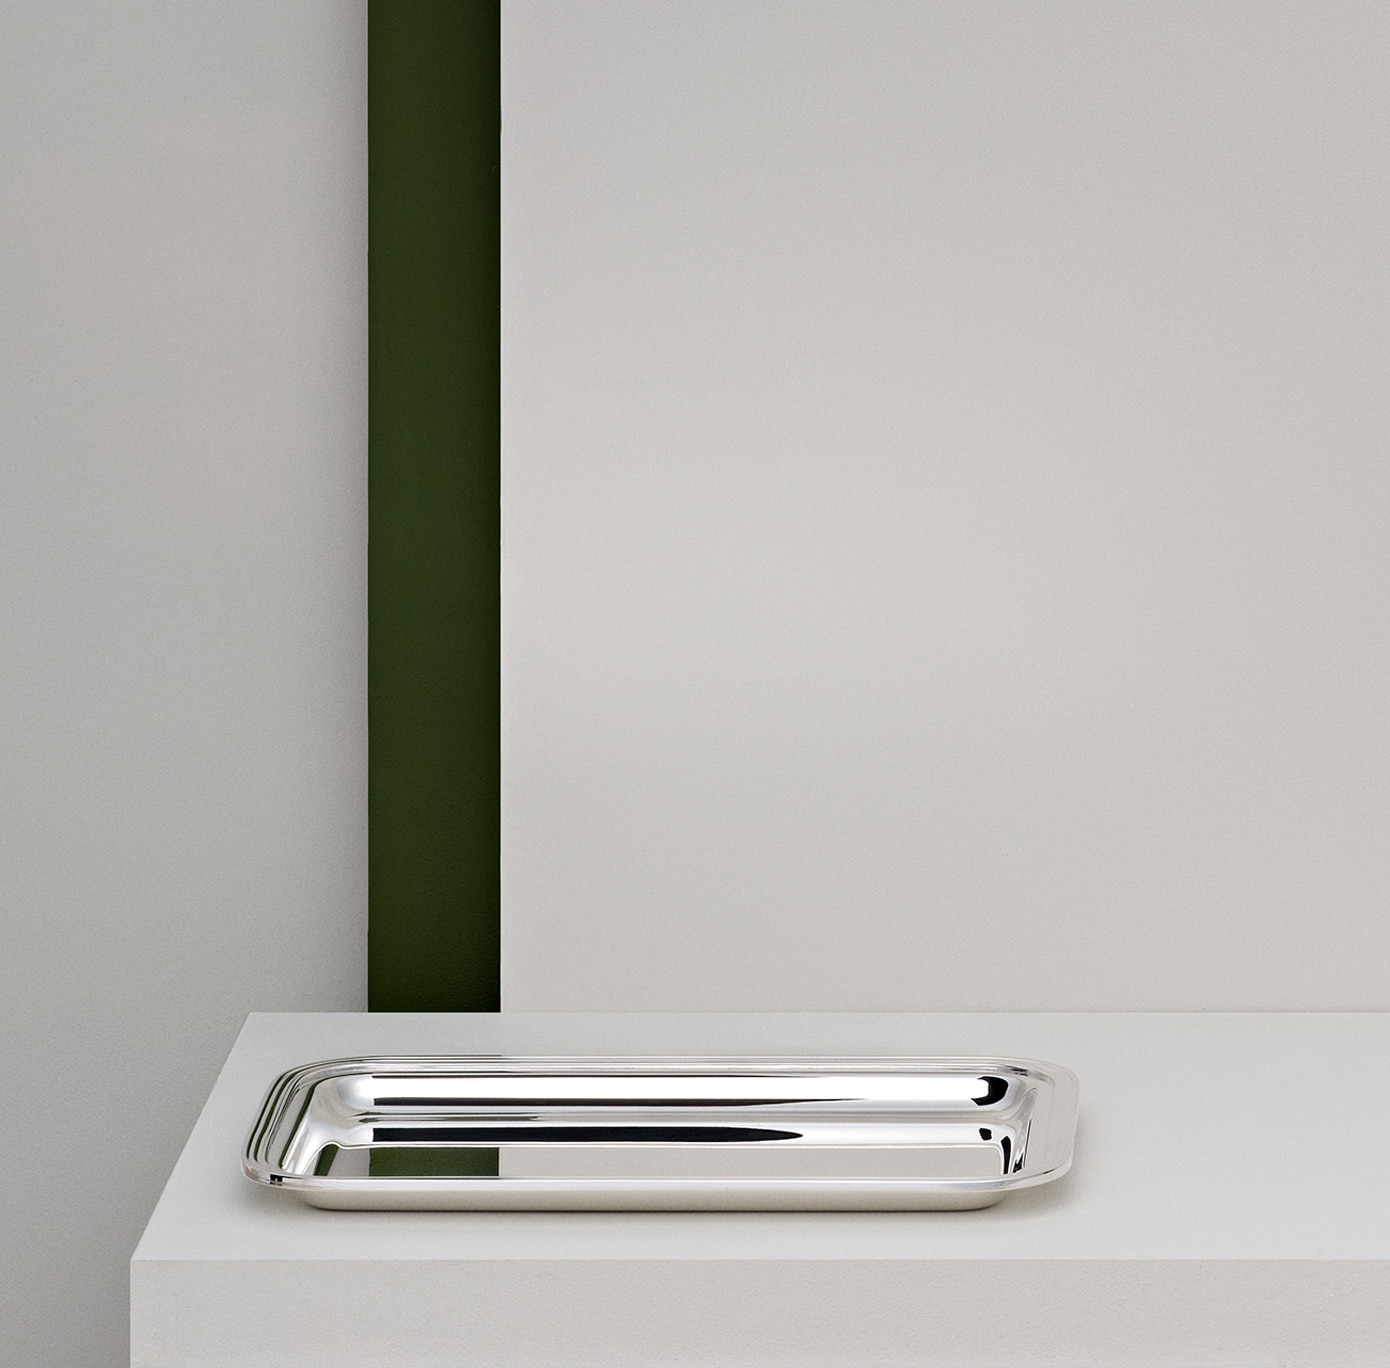 Dépêche tray in silver plated photographed on a white stele in front of a green band decoration